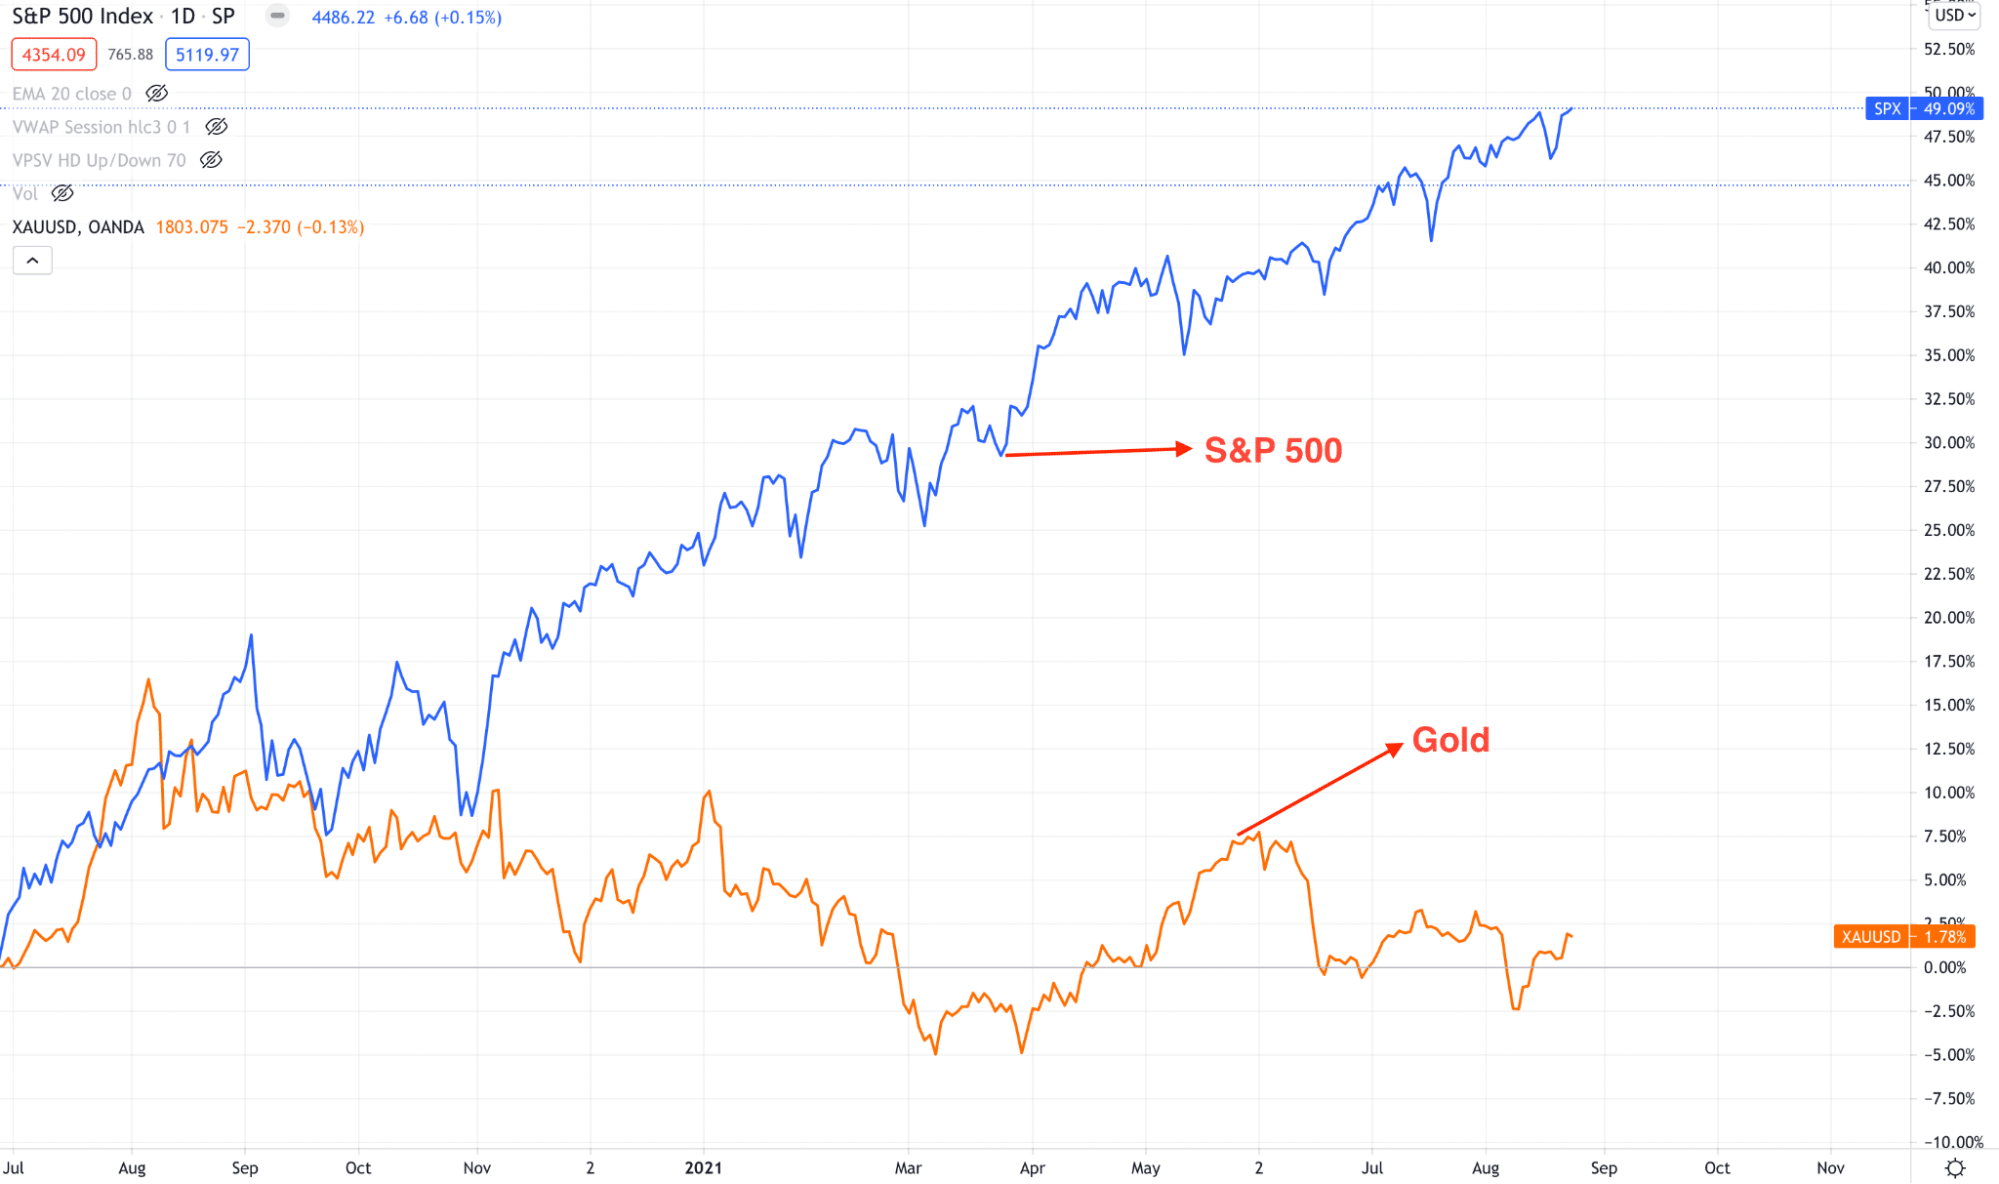 S&P 500 and gold